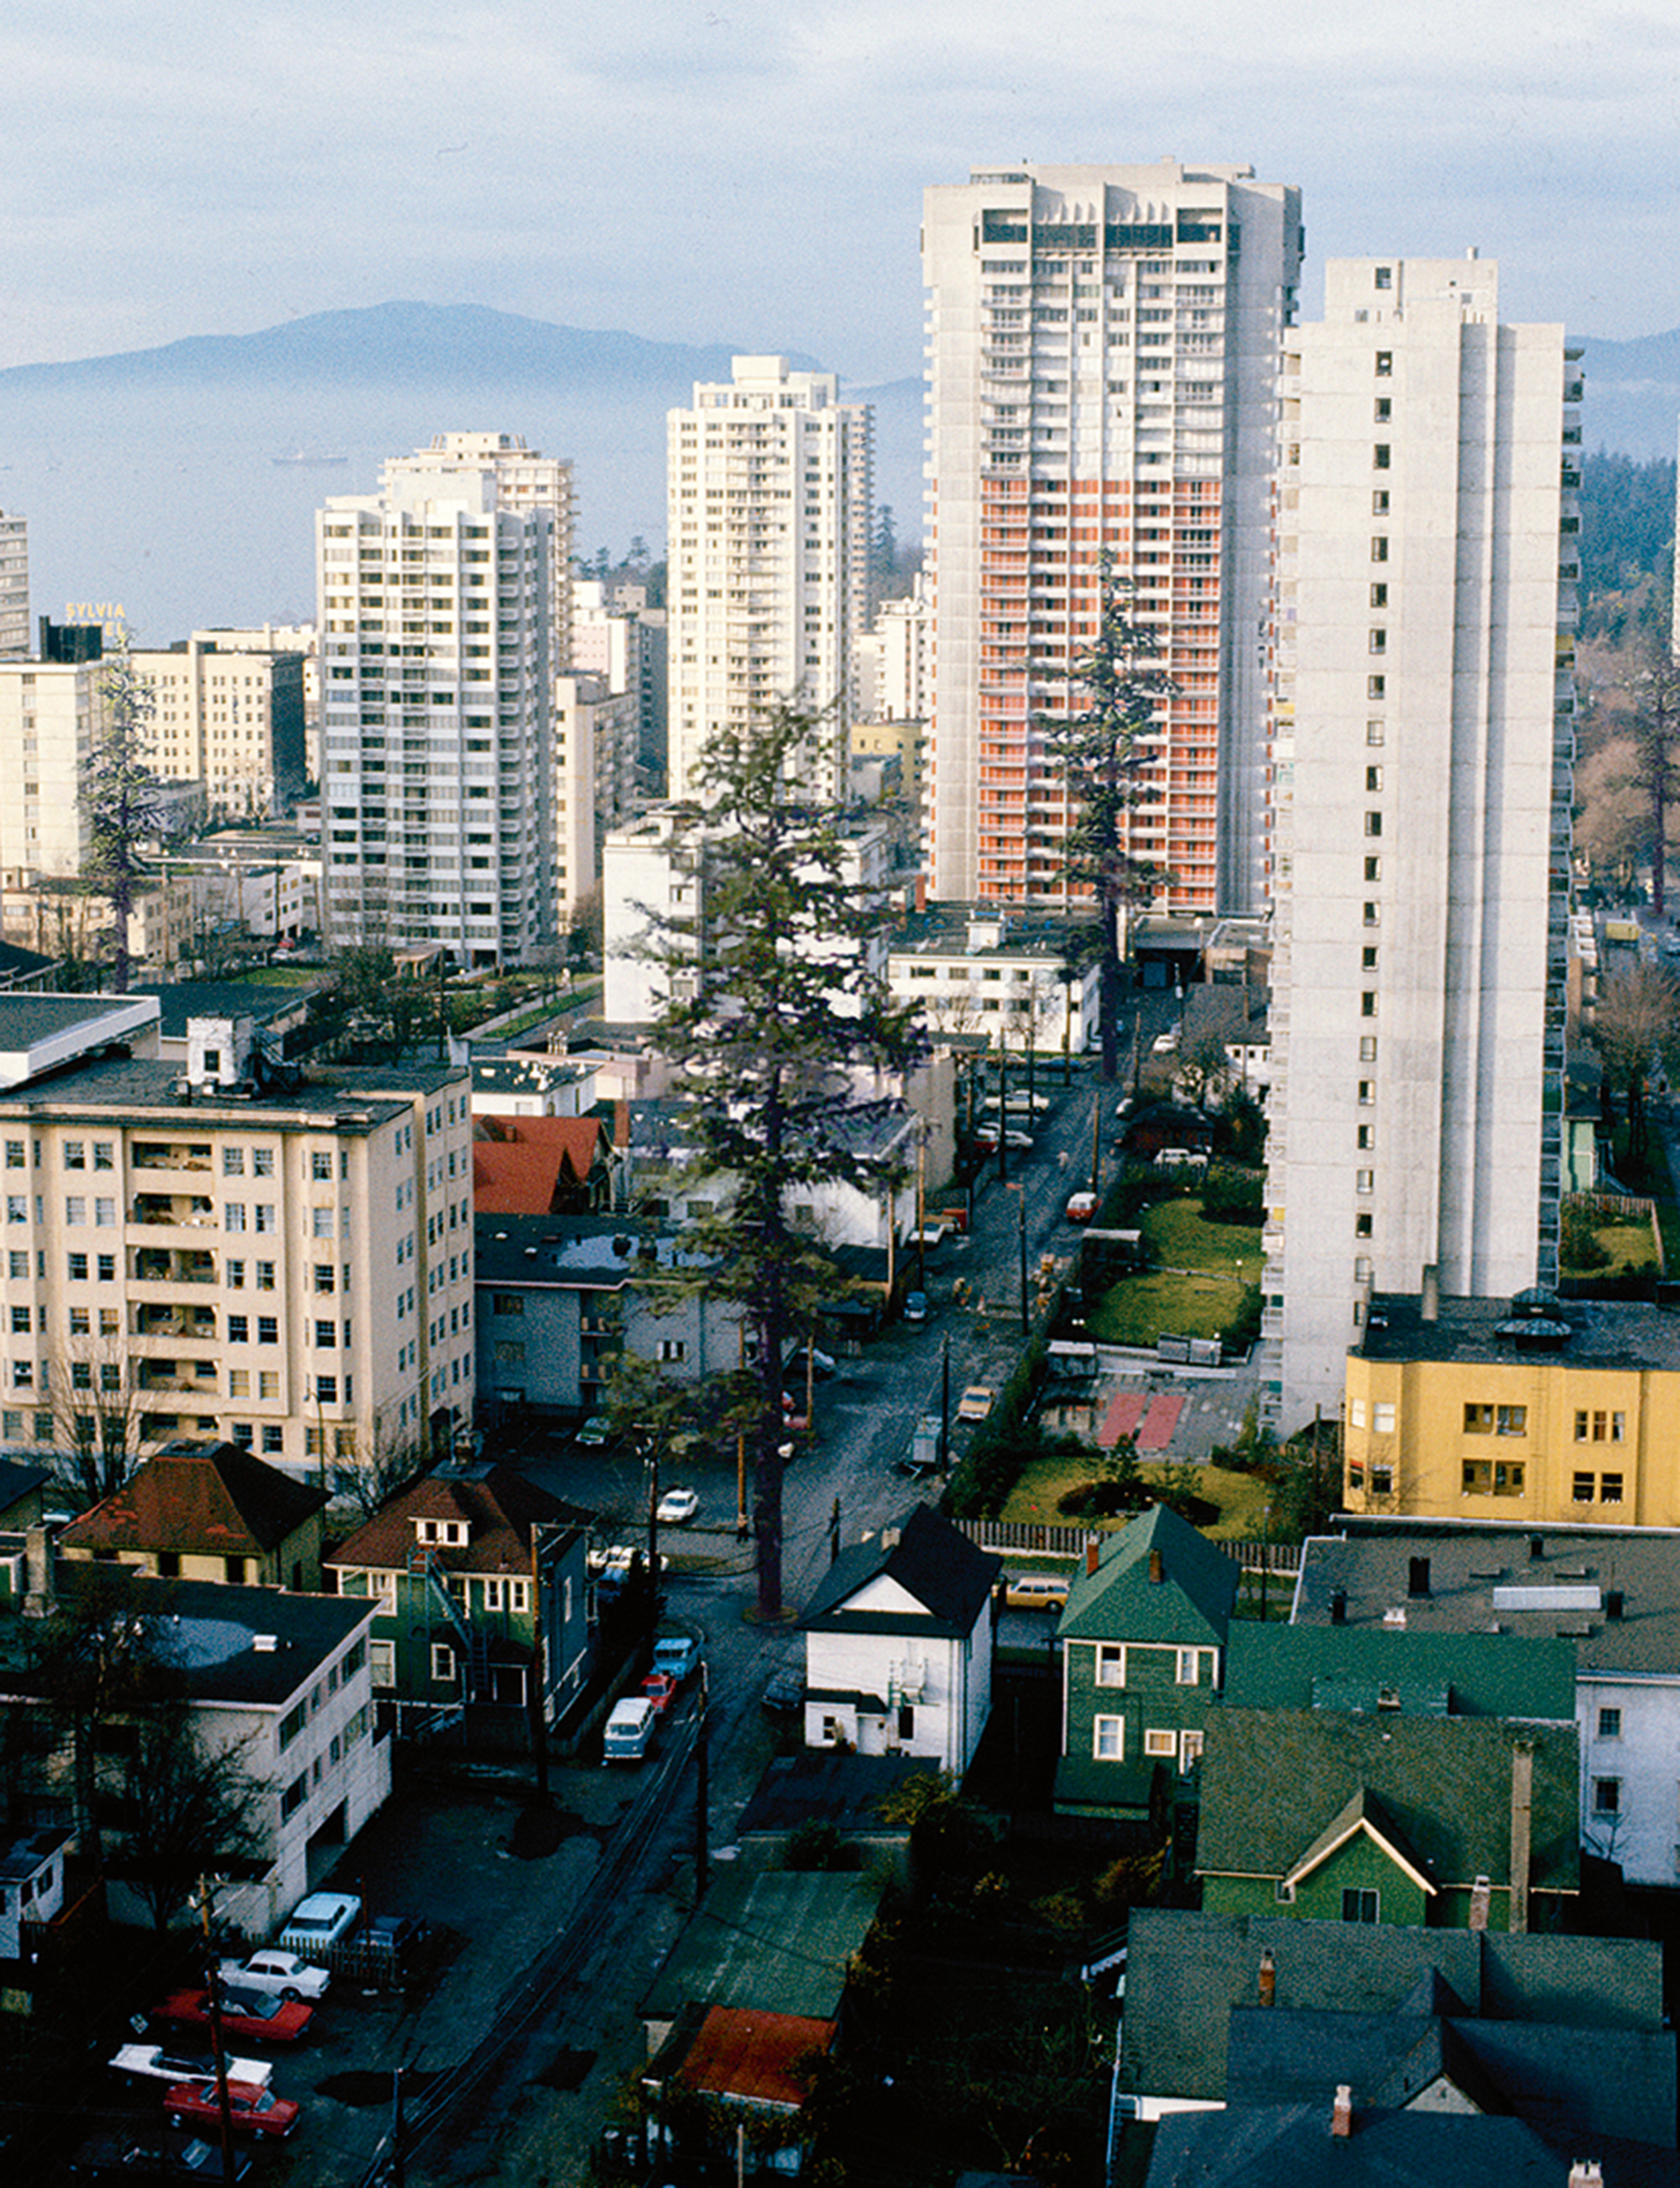 A photograph titled “Roundabout Vancouver: West End circa nineteen seventies.” It shows residential high rises.